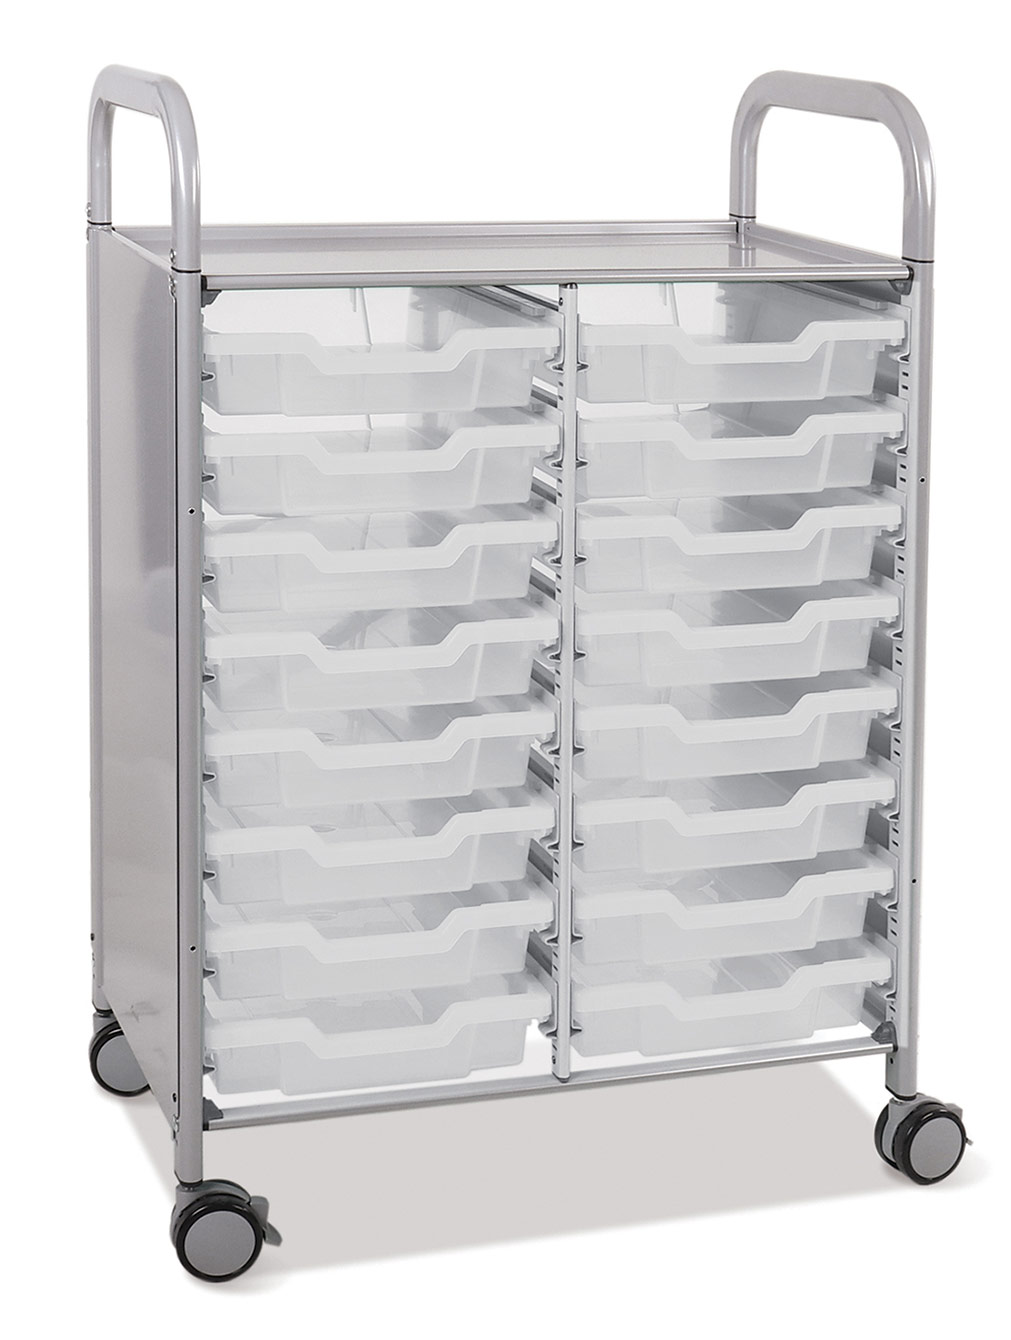 Callero Plus Shield Double Trolley 16 Shallow Trays - Gratnells